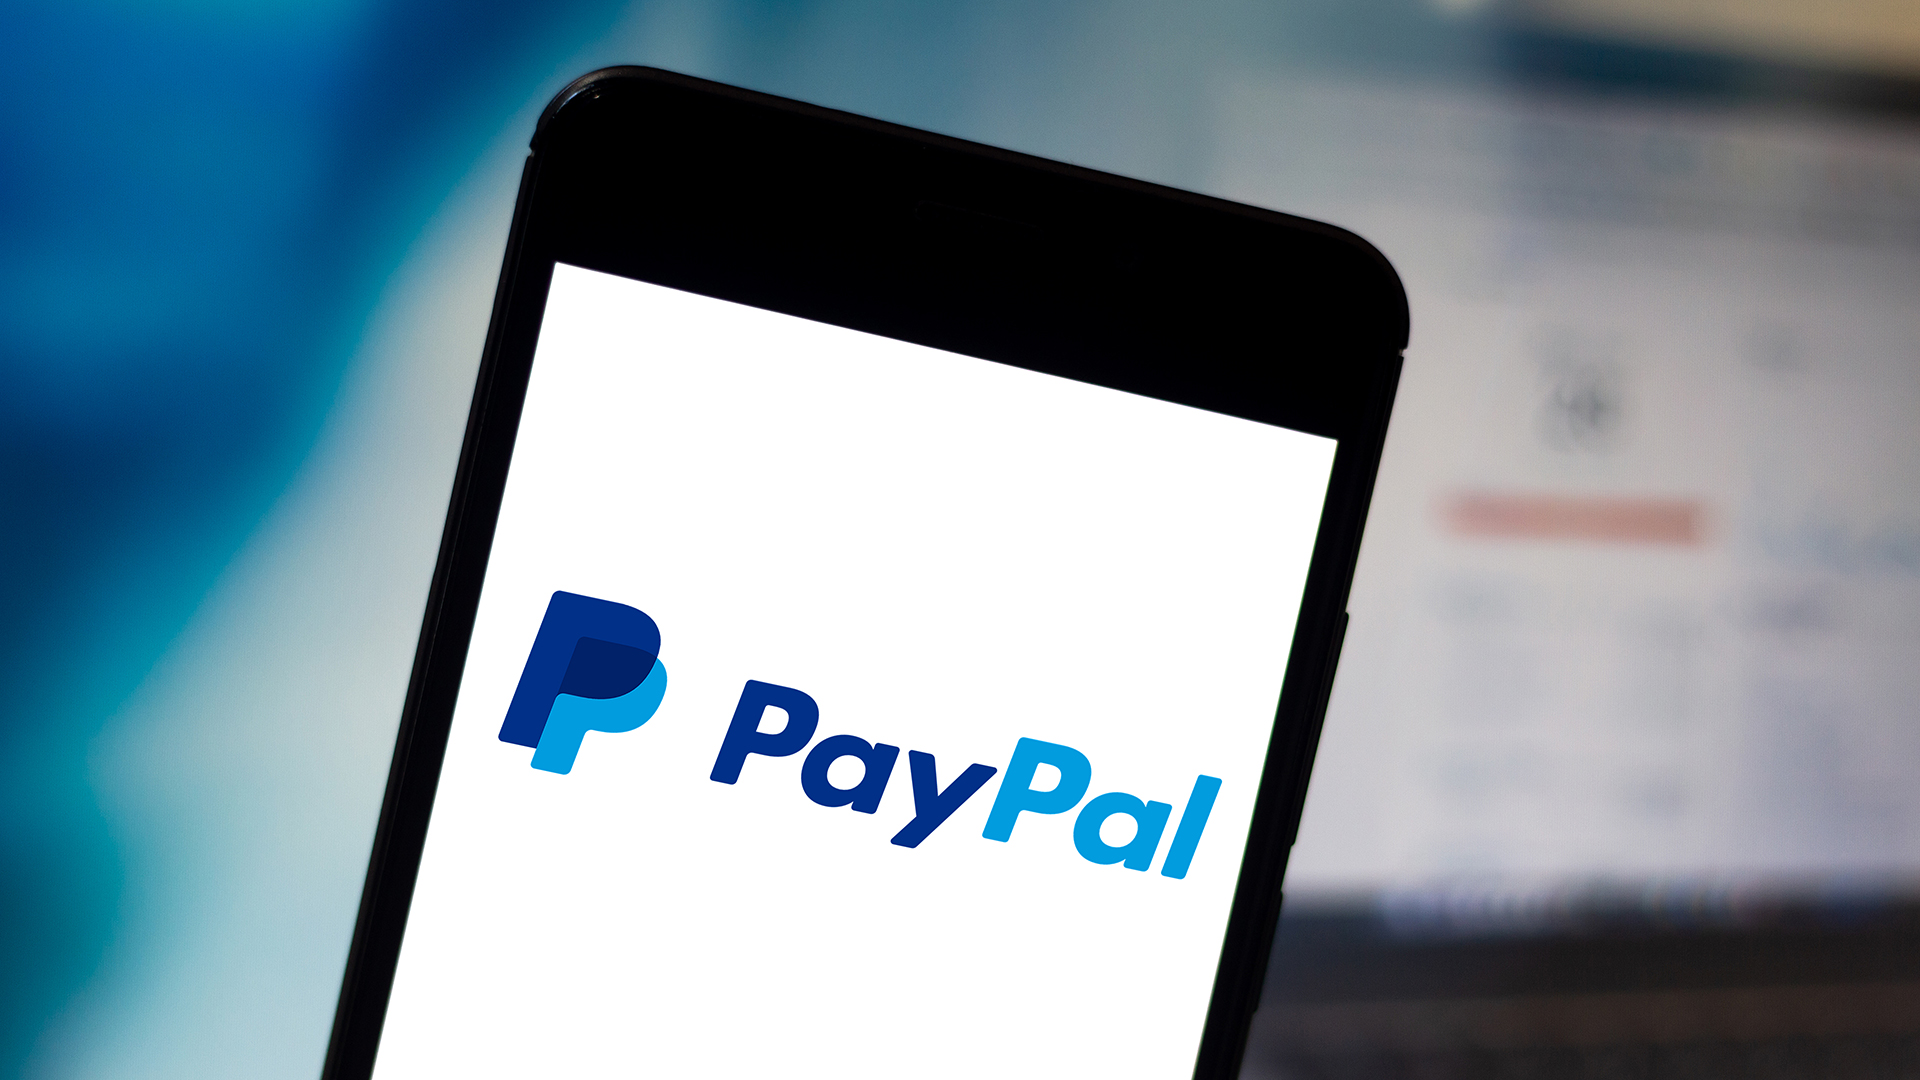 PayPal friends and family — how does it work?